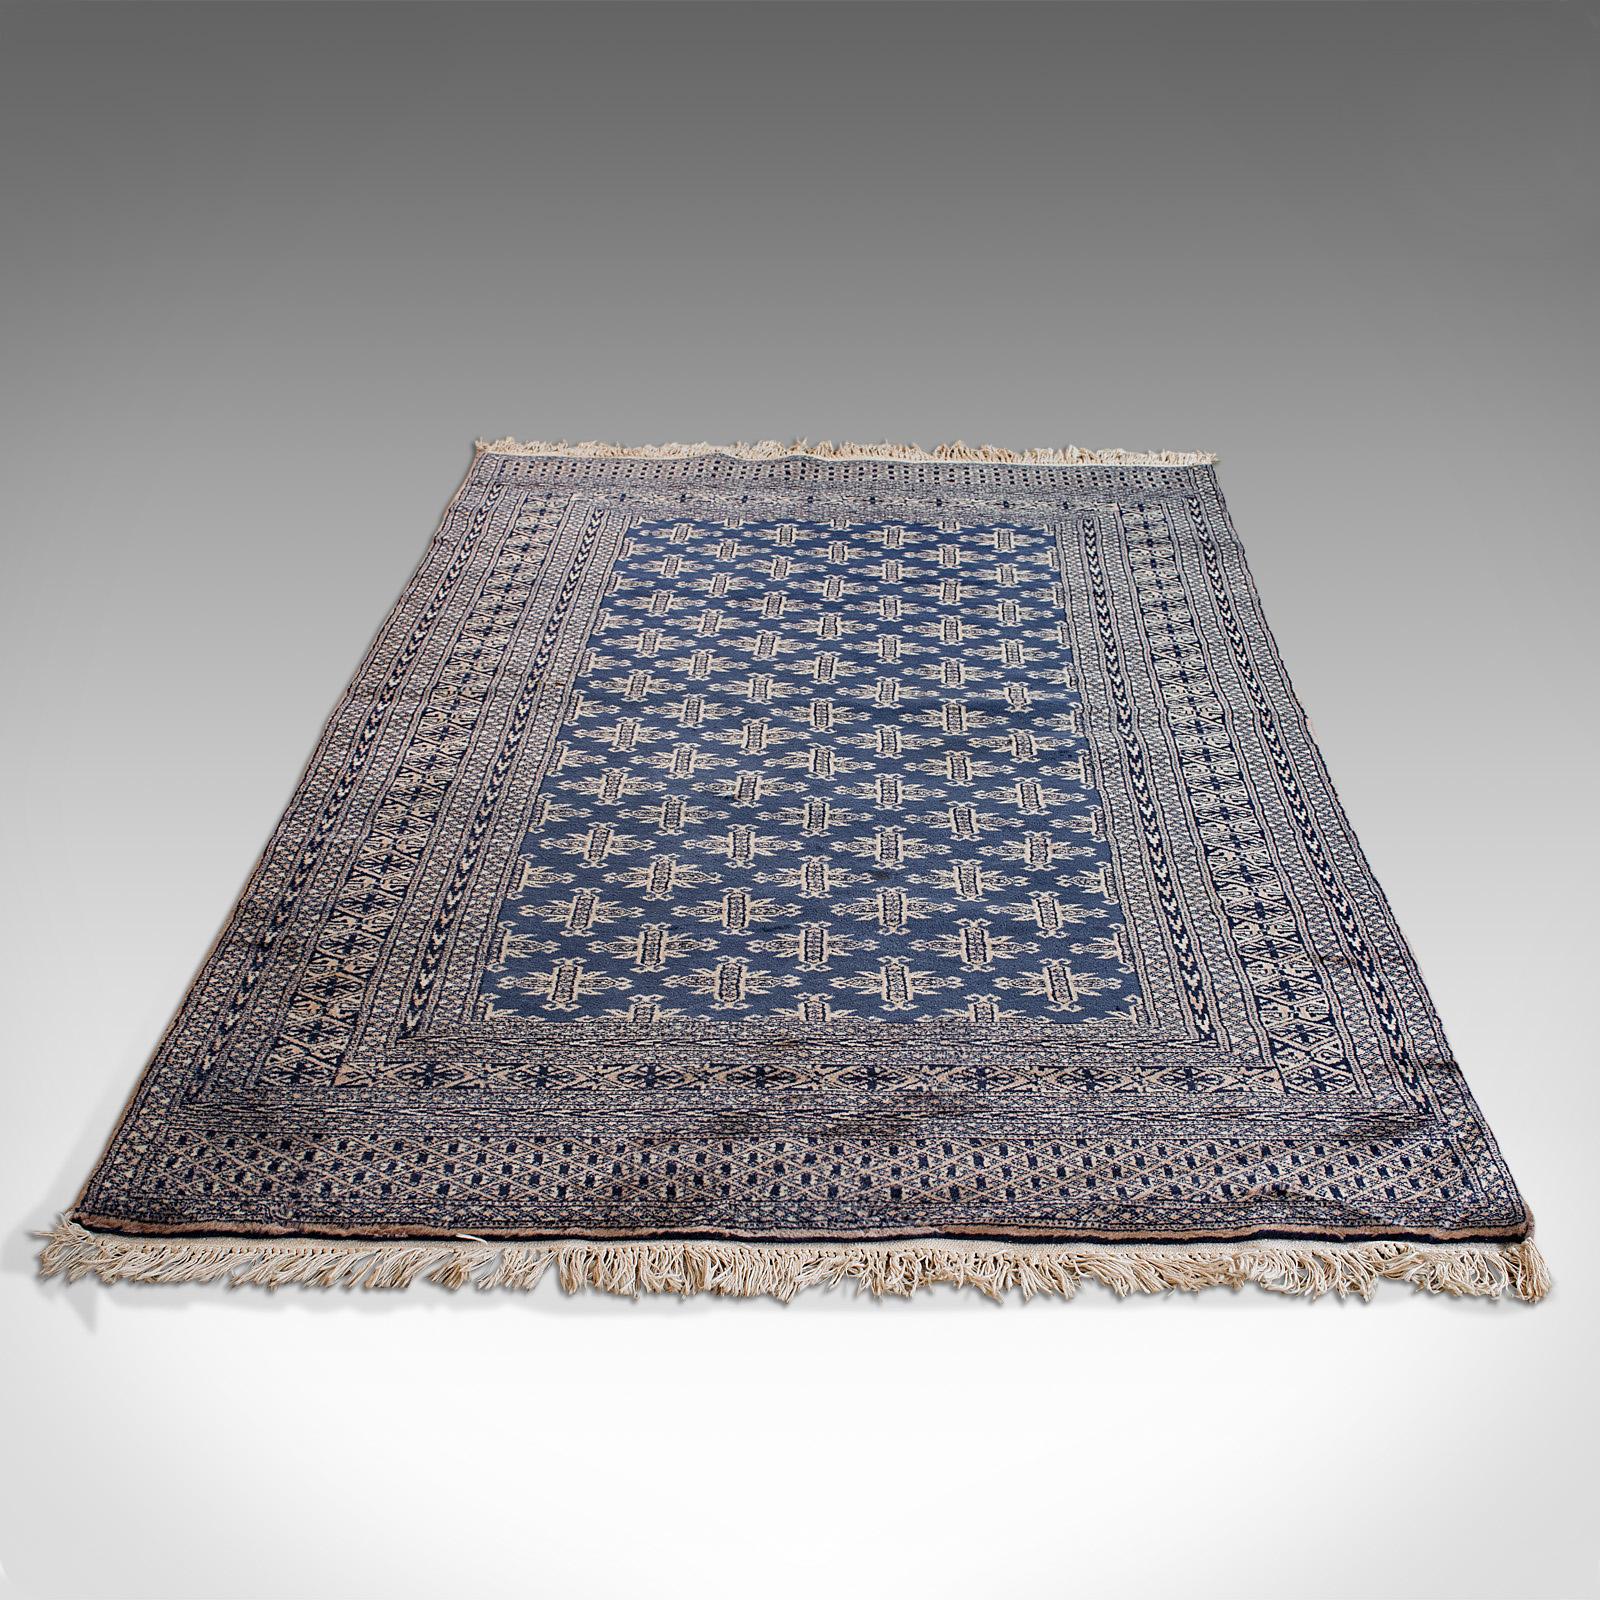 Vintage Bokhara Rug, Persian, Woven, Hall Carpet, Early 20th Century, circa 1930 For Sale 1